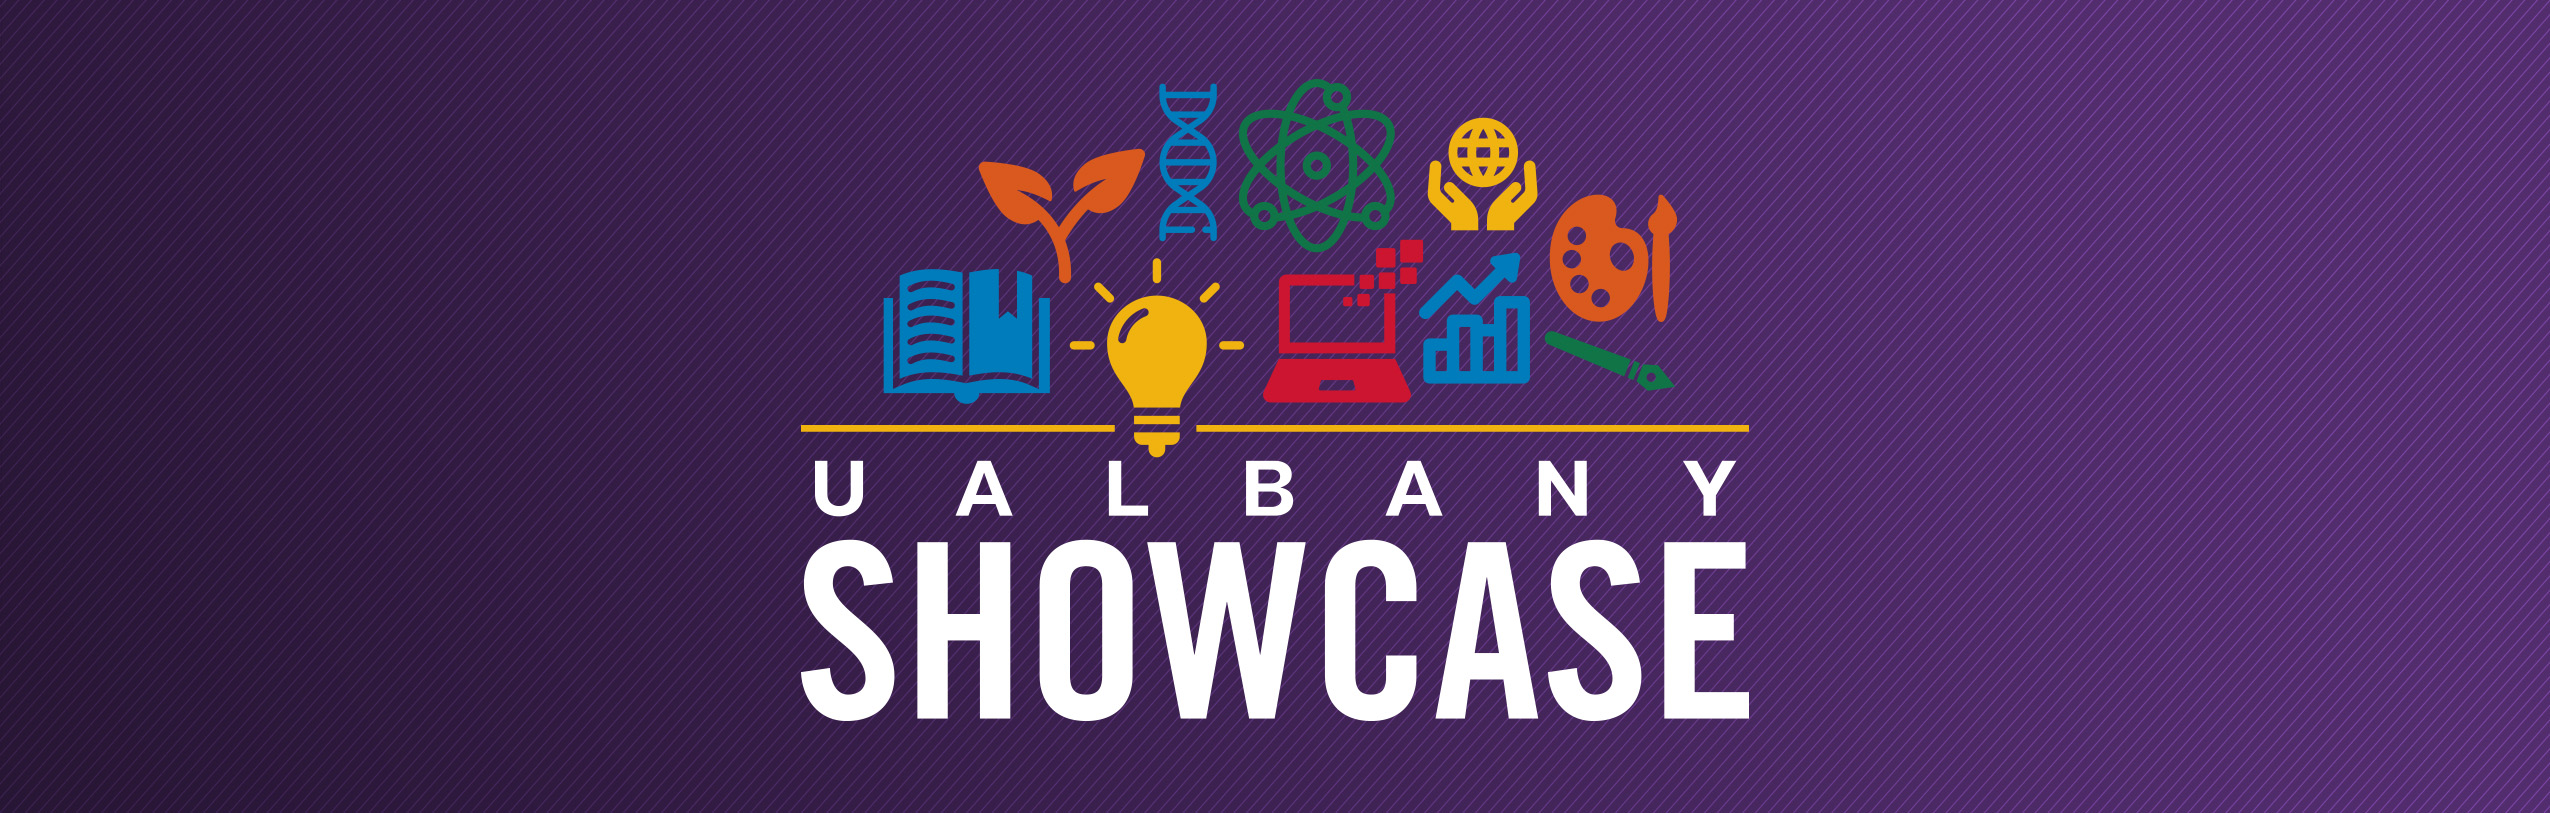 UAlbany Showcase logo, which includes various icons such as a book, lightbulb, DNA, paint brush and palette, and computer.